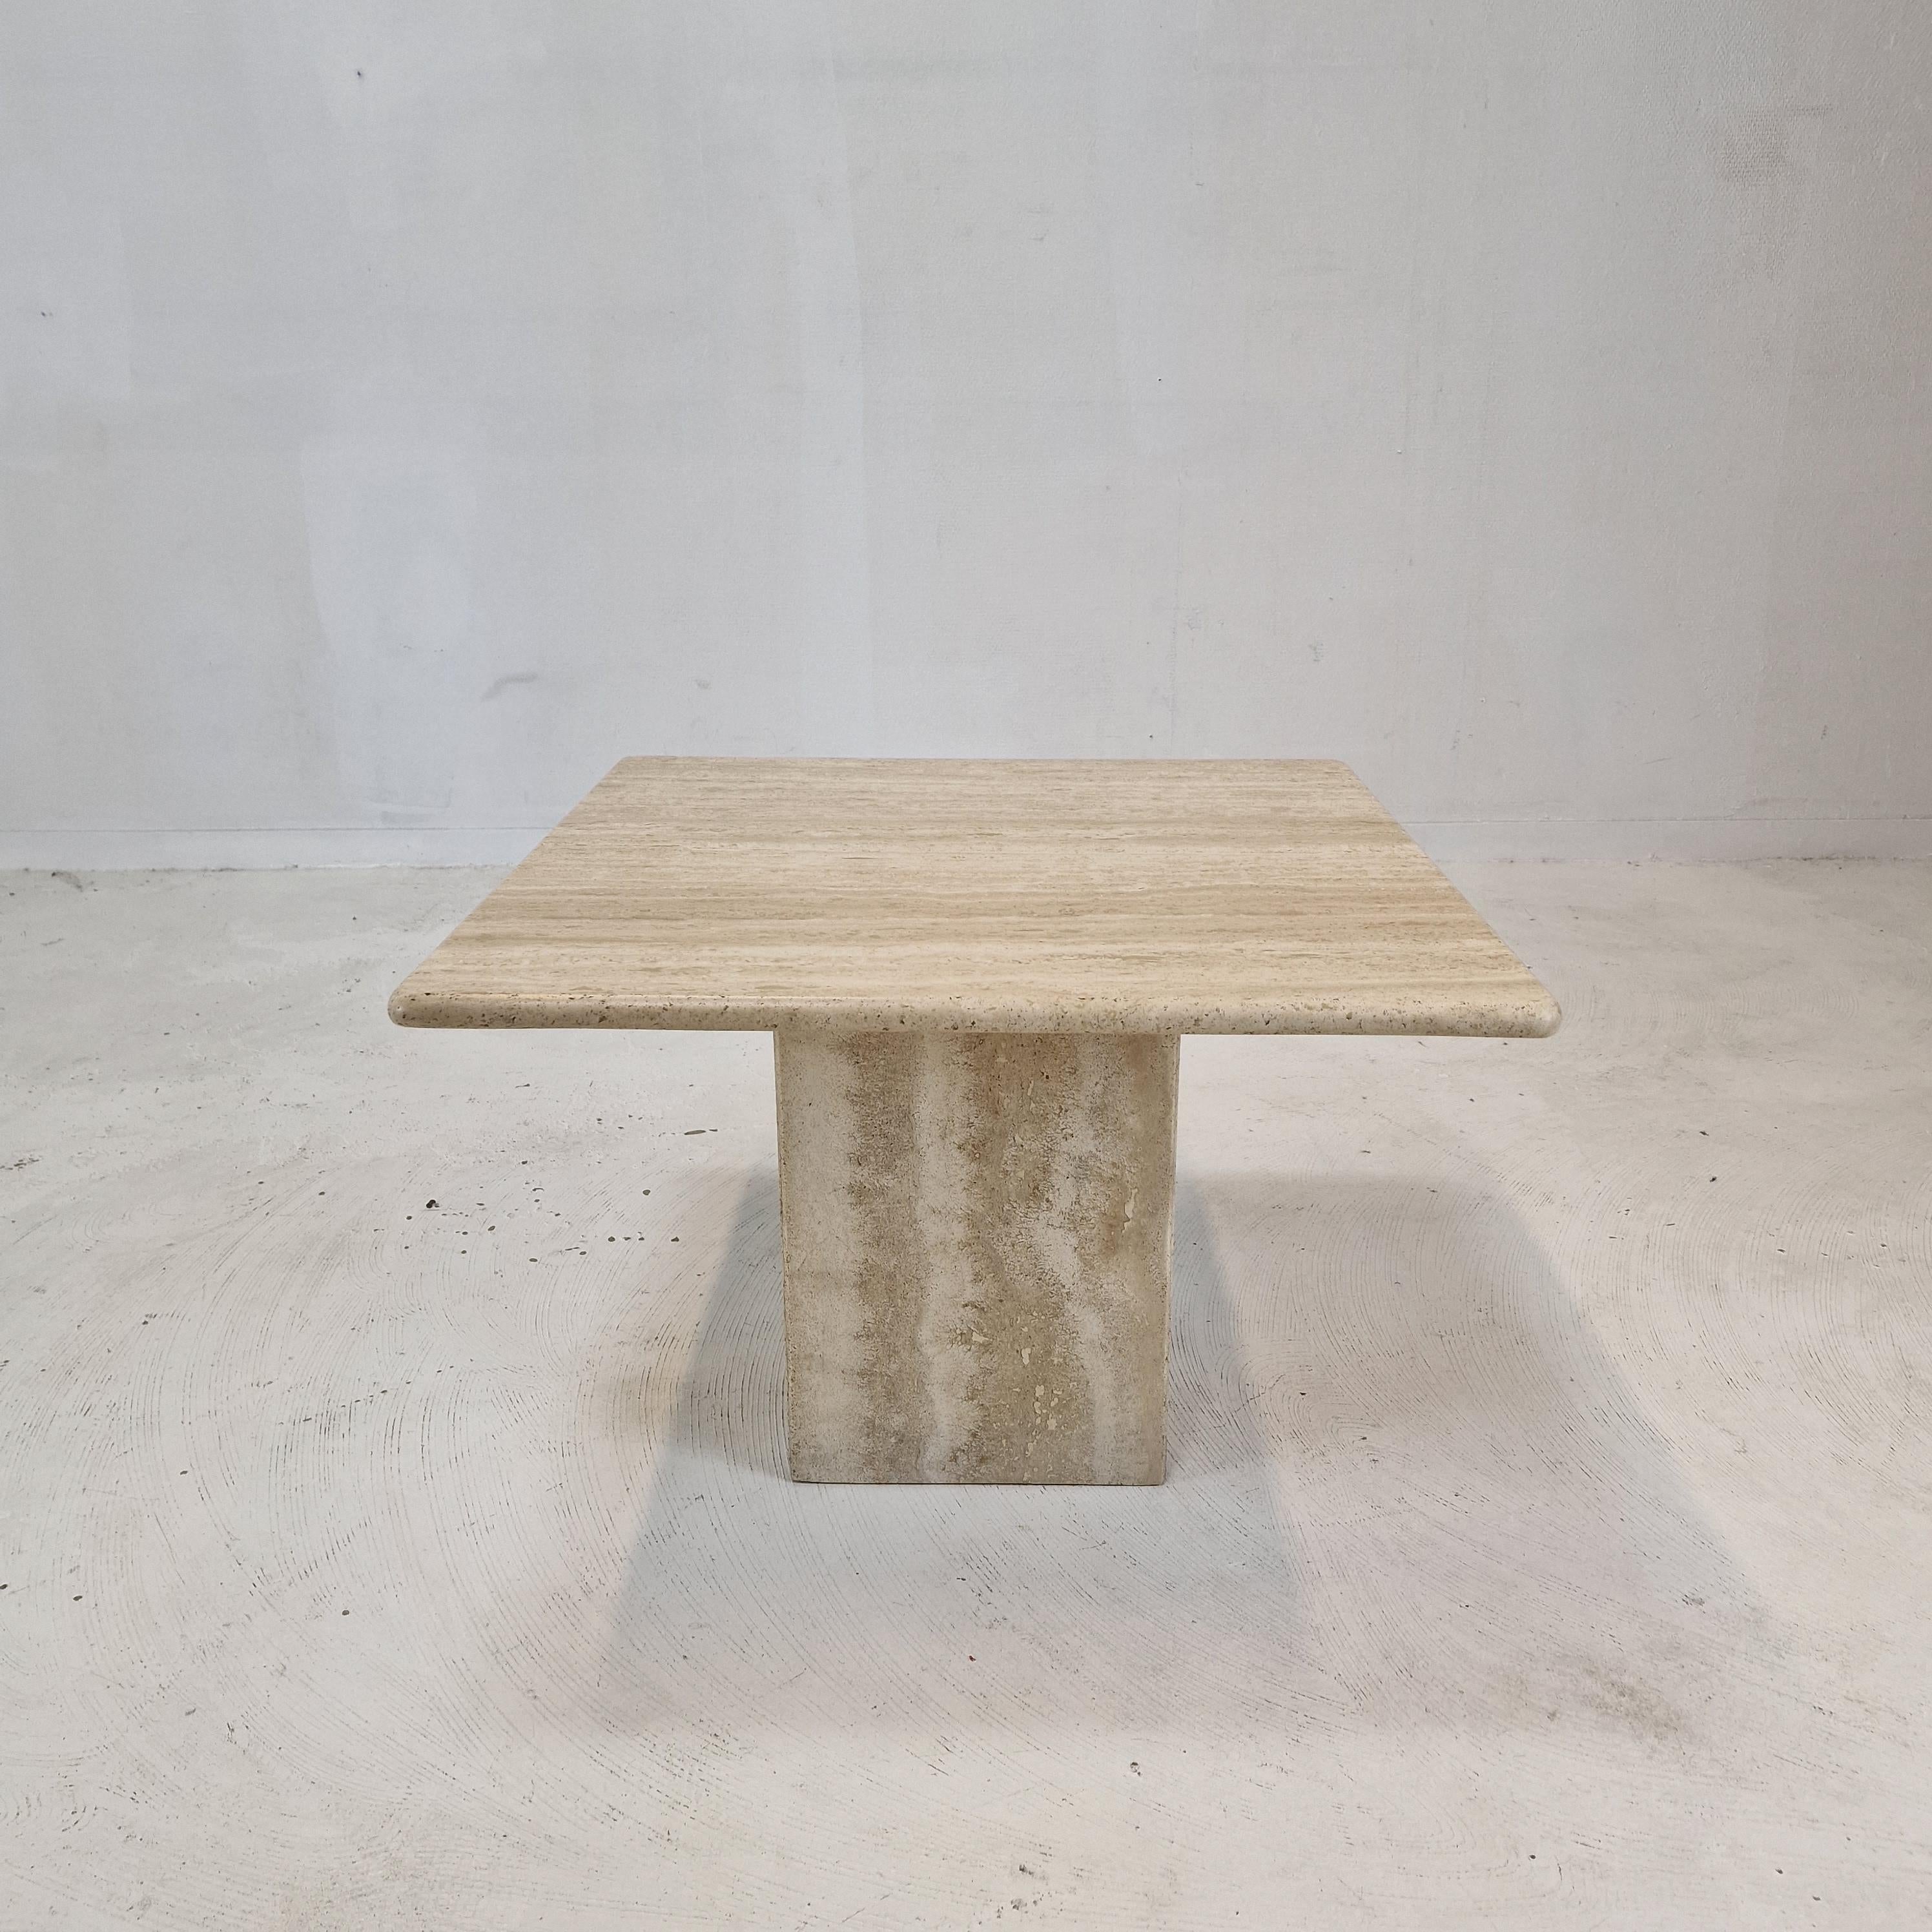 Very nice Italian coffee or side table handcrafted out of travertine, 1980s.

The top is rounded on the edge. 
It is made of beautiful travertine.
Please take notice of the very nice patterns.

It has the normal traces of use, see the